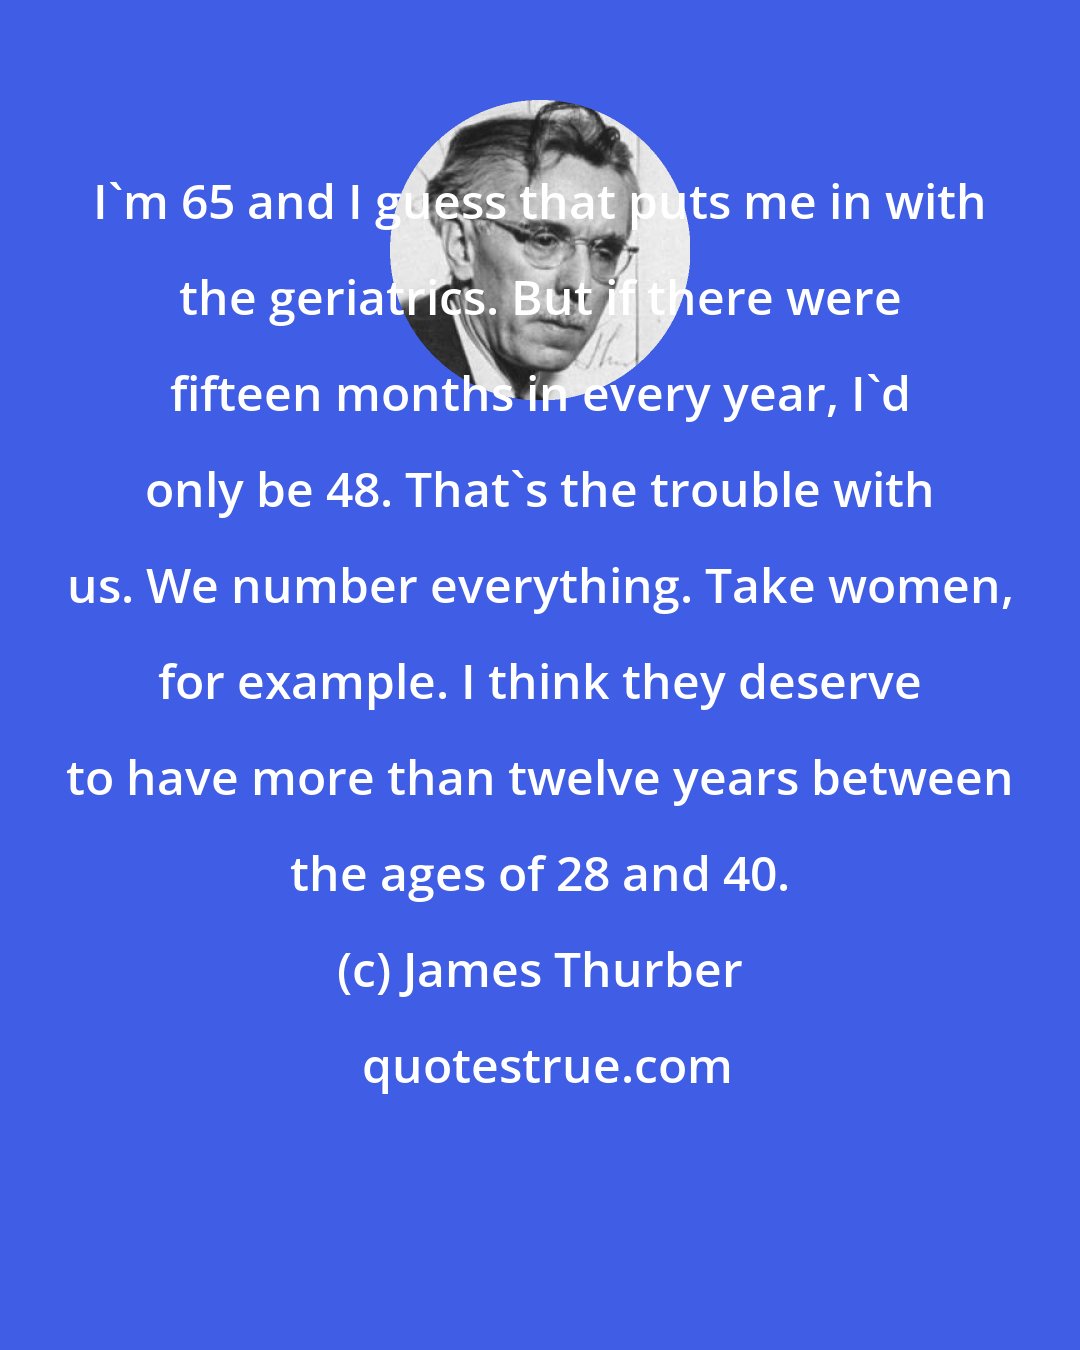 James Thurber: I'm 65 and I guess that puts me in with the geriatrics. But if there were fifteen months in every year, I'd only be 48. That's the trouble with us. We number everything. Take women, for example. I think they deserve to have more than twelve years between the ages of 28 and 40.